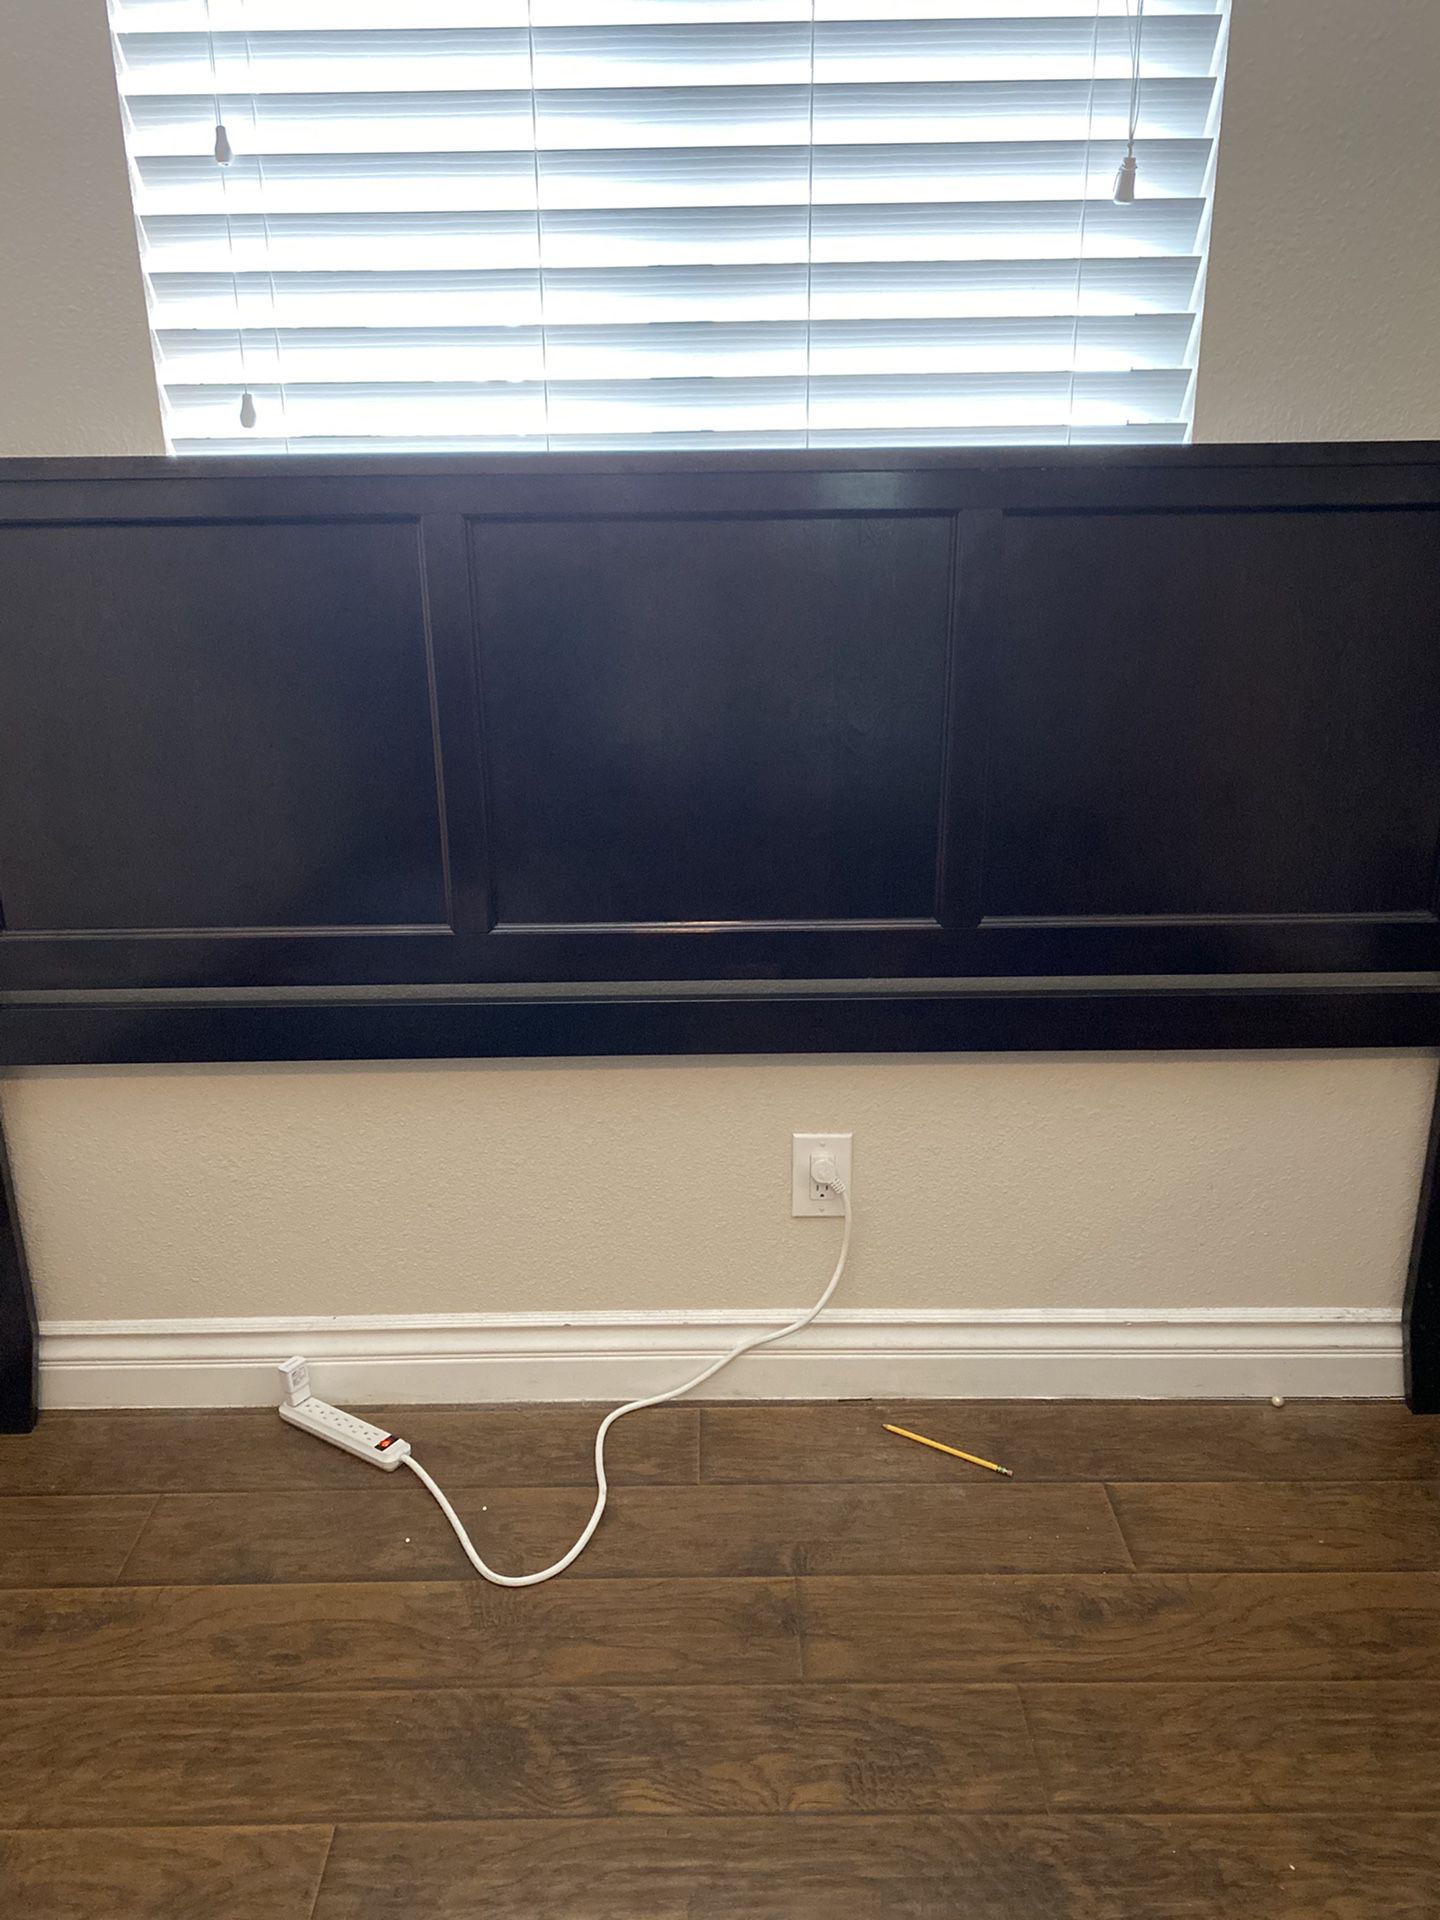 King size platform bed with 2-side drawers. Solid wood in dark rich brown. Too large for the room downsizing to accommodate living quarters asking $1